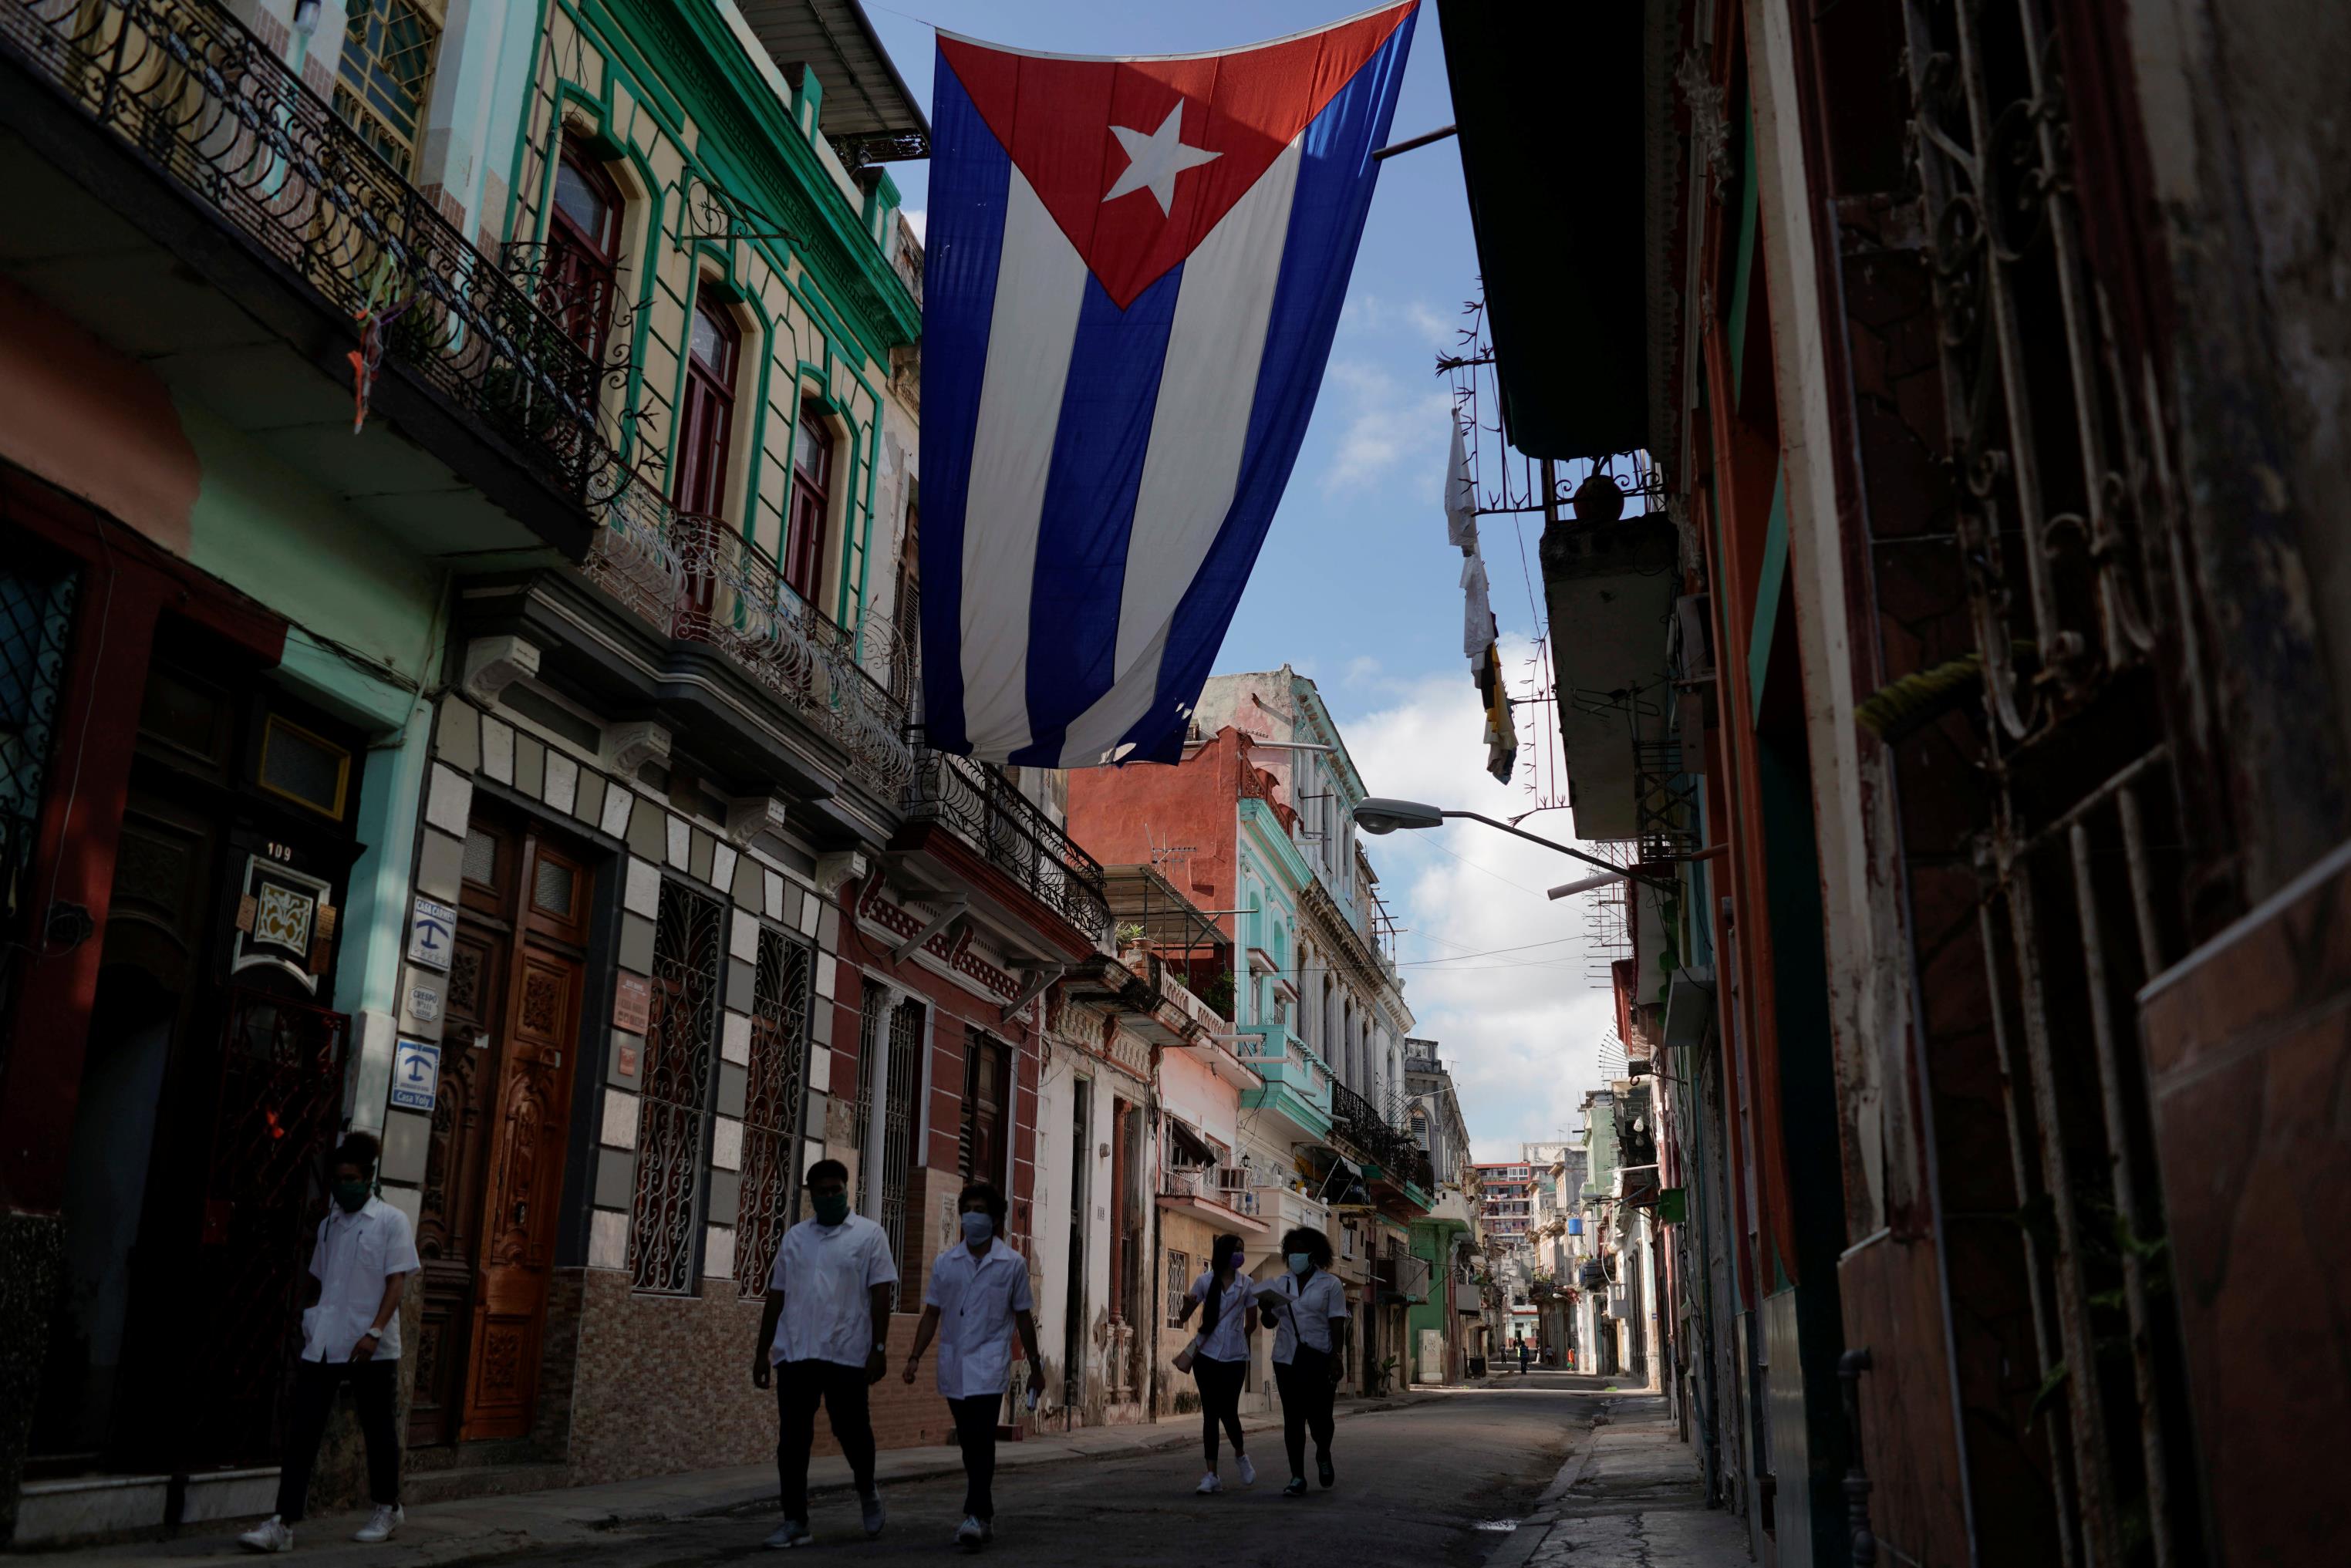 Medical students walk past a Cuban flag as they check door-to-door for people with symptoms amid co<em></em>ncerns a<em></em>bout the spread of the coro<em></em>navirus disease (COVID-19), in downtown Havana, Cuba, May 12, 2020. REUTERS/Alexandre Meneghini